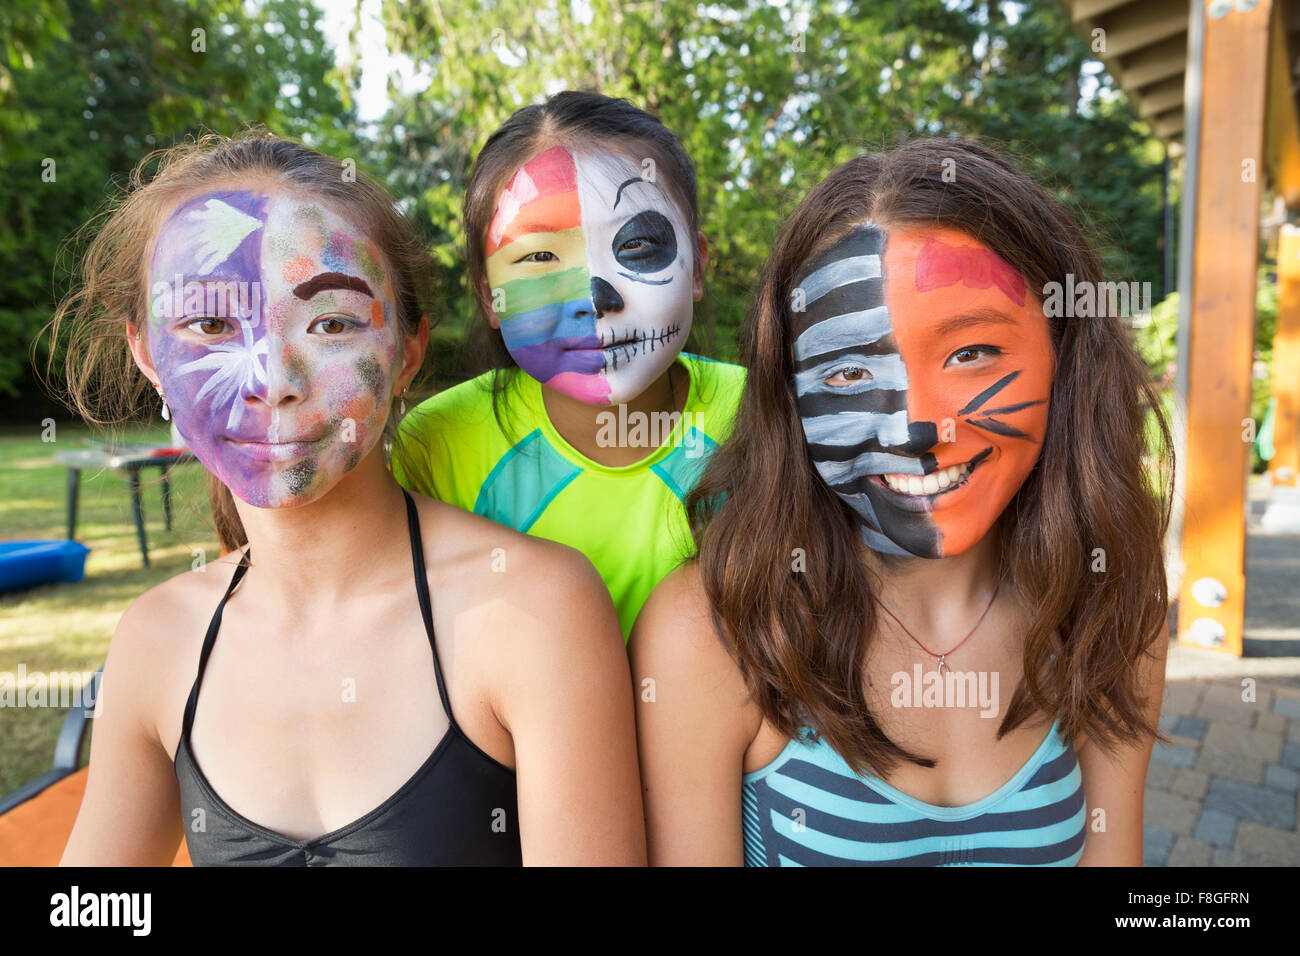 Smiling girls wearing face paint Stock Photo